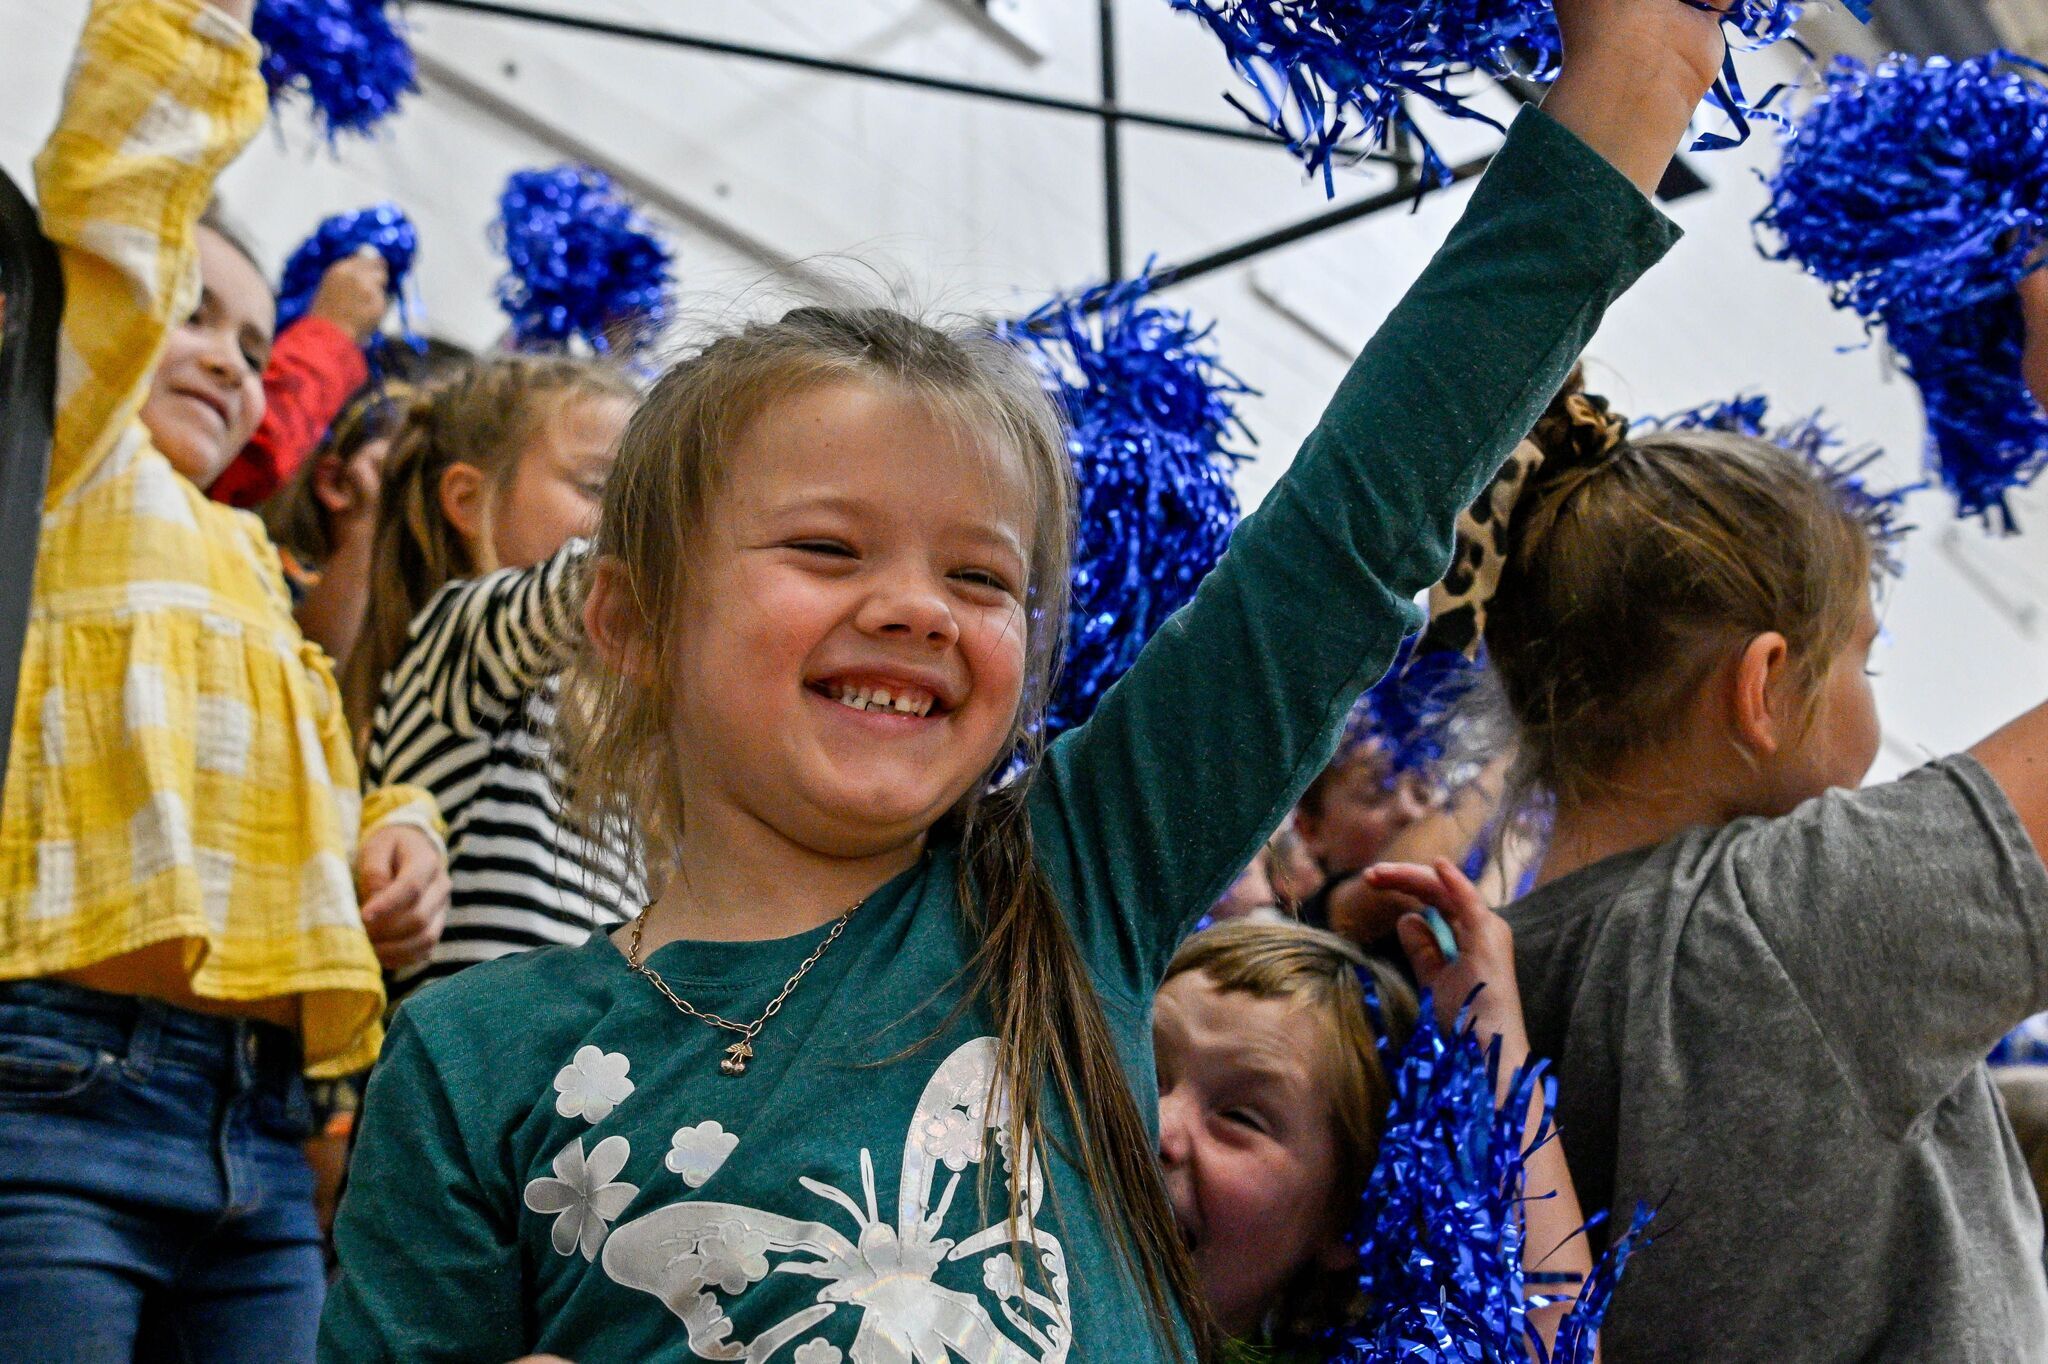 Elementary students with pom poms